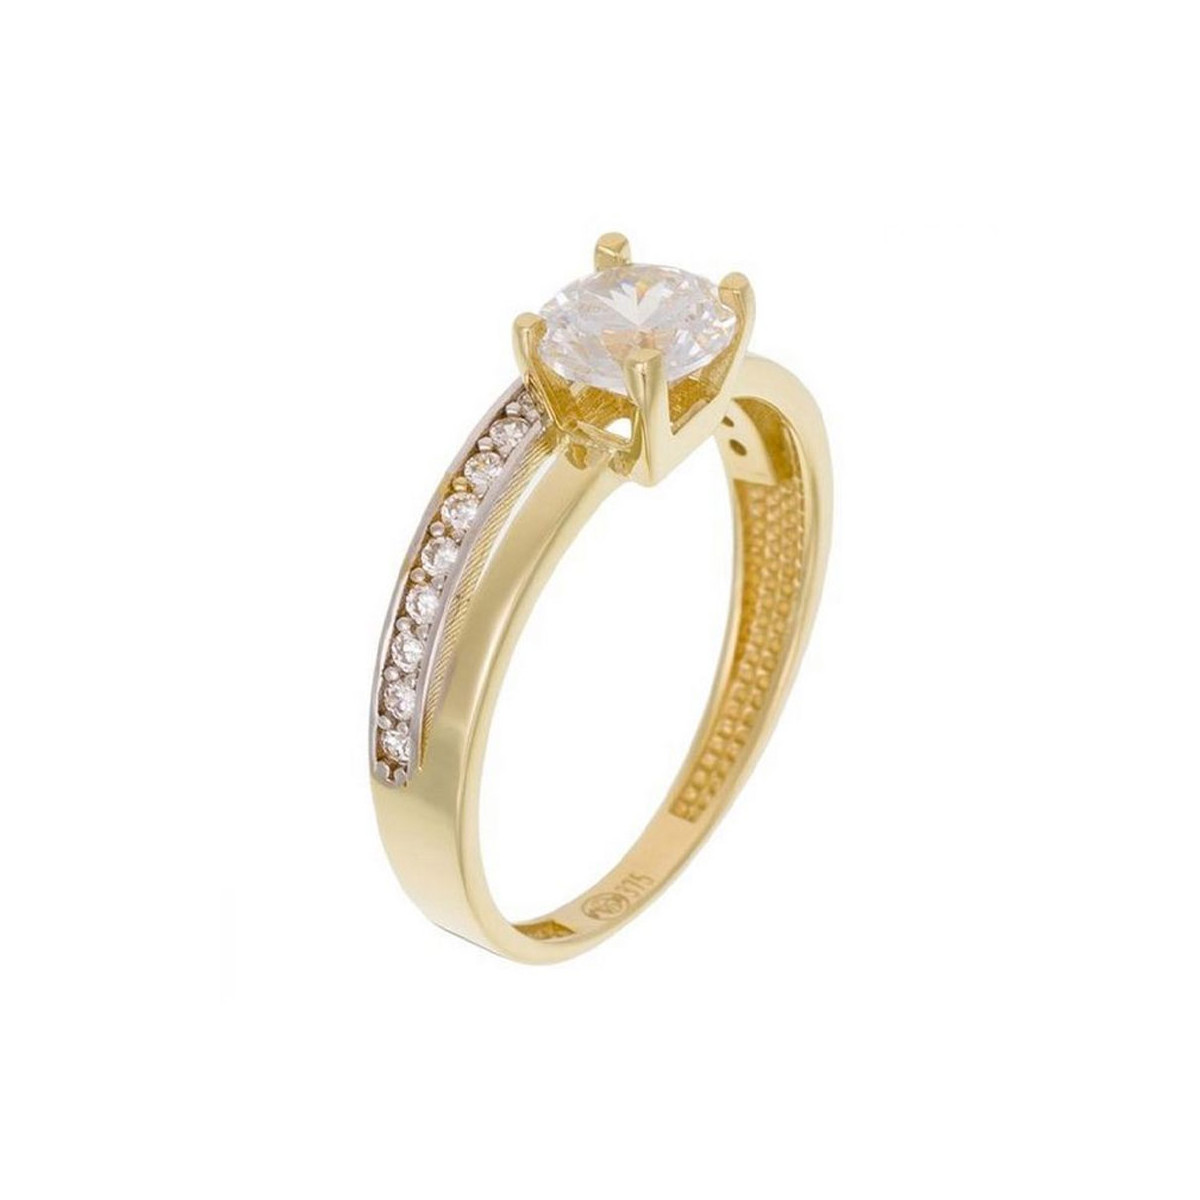 Bague "Majestueuse" Or bicolore